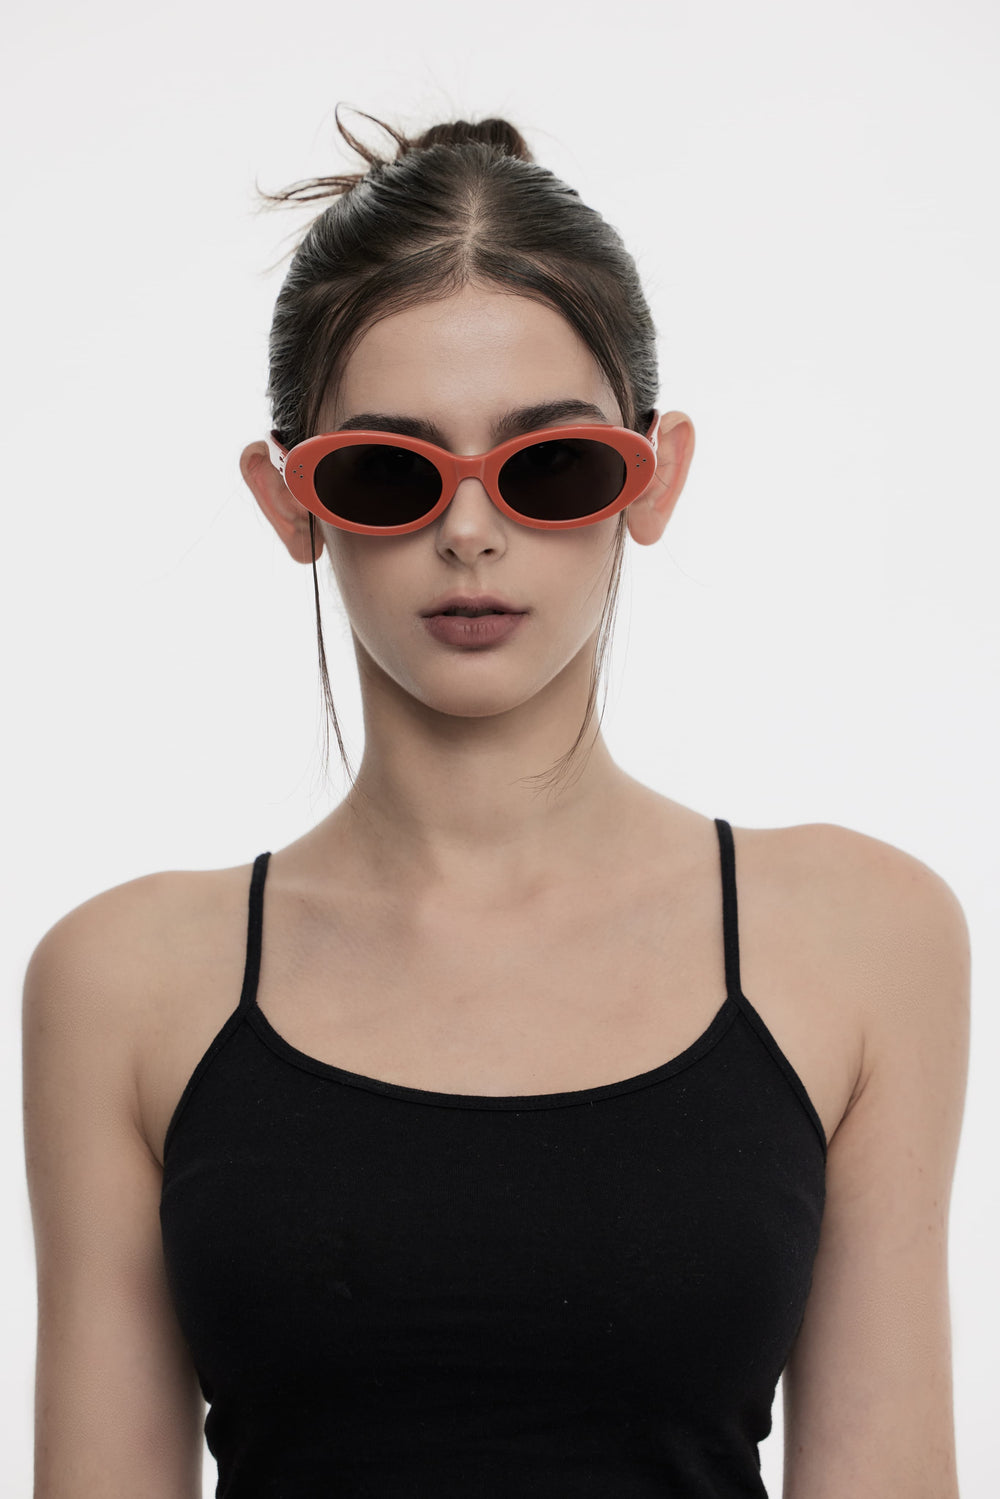 Female Model of her front face wearing Wave in red round stylish sunglasses from Mercury Retrograde Burr Puzzle Collection 